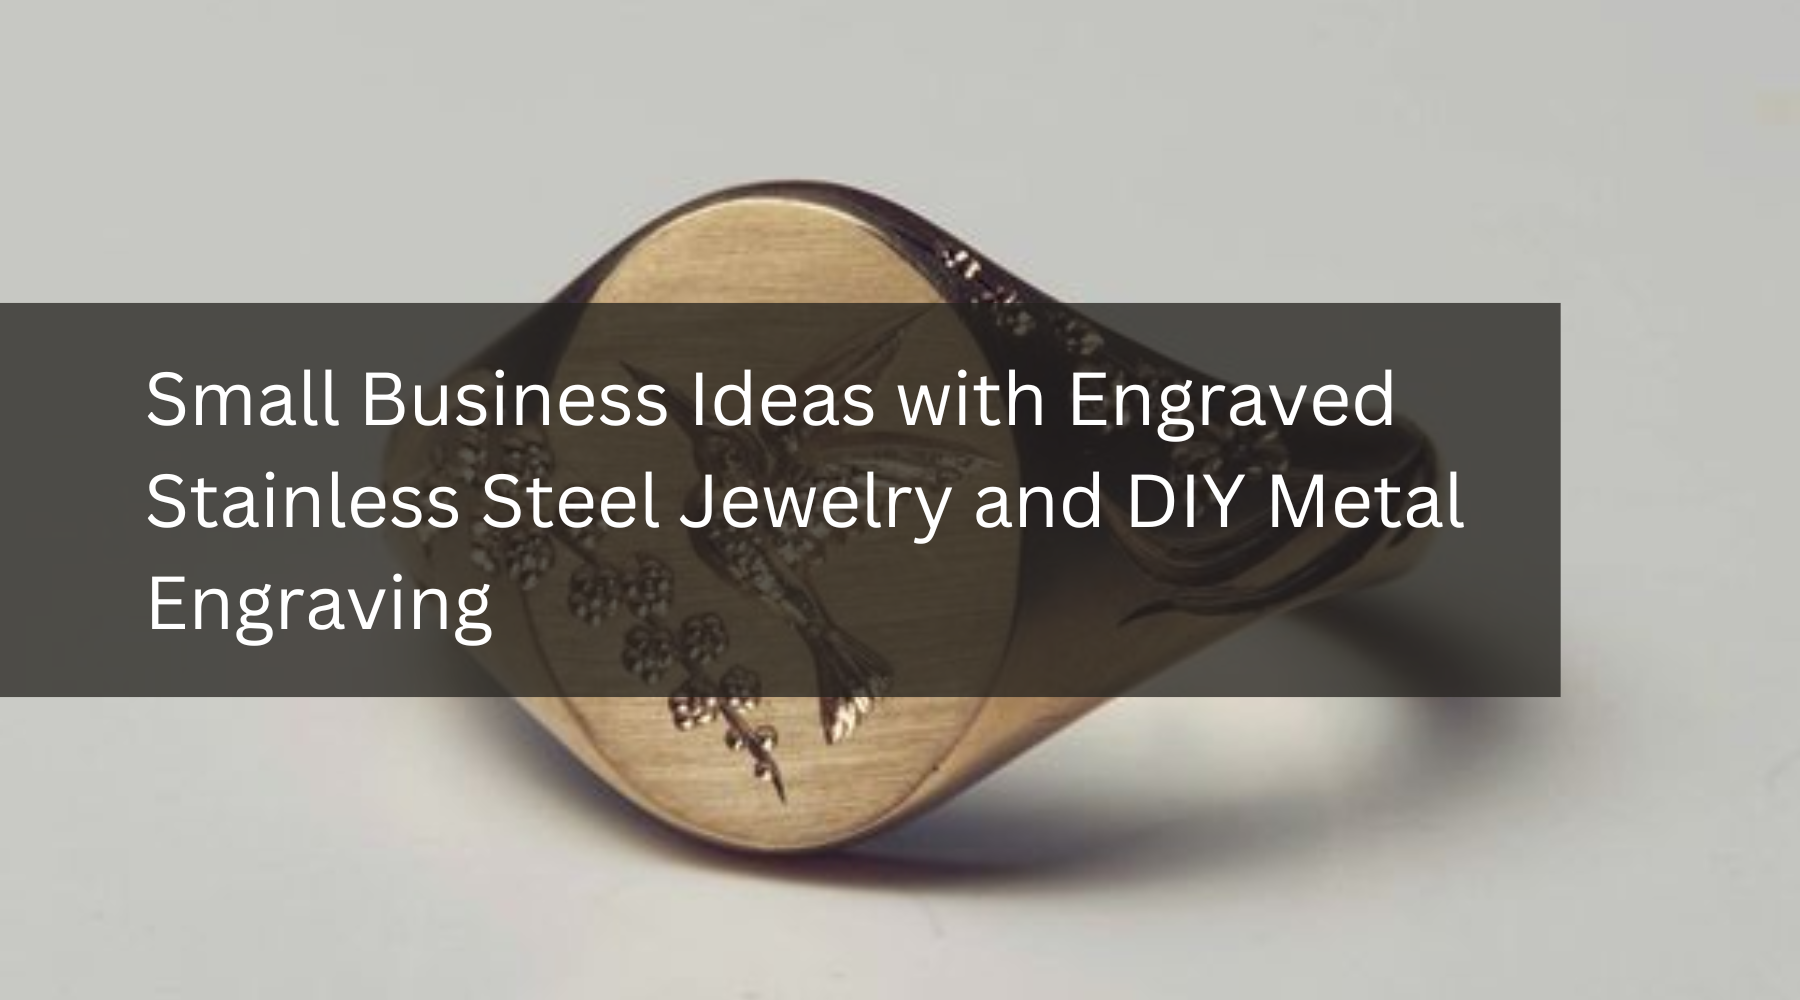 Small Business Ideas with Engraved Stainless Steel Jewelry and DIY Metal Engraving